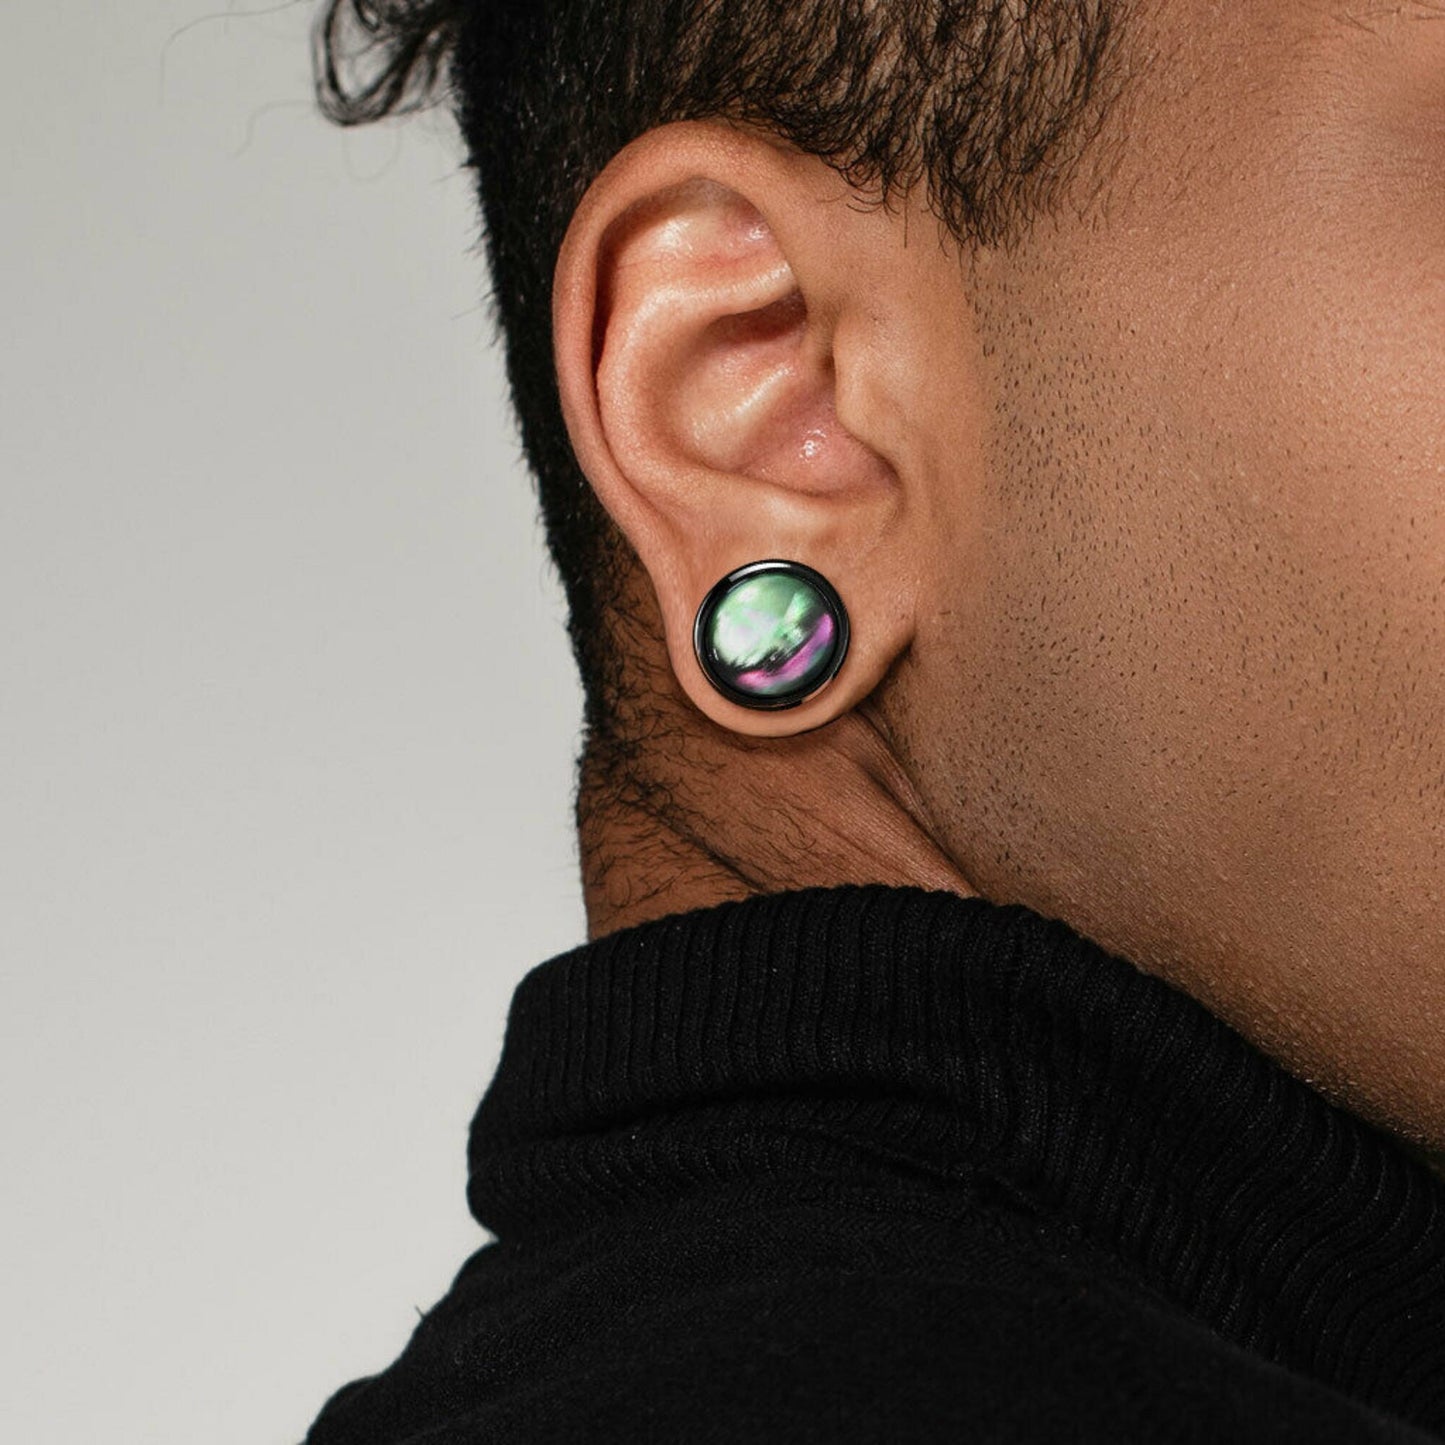 PAIR of Unique Iridescent Shell Black Screw Fit Tunnels/Plugs - Gauges 0g (8mm) thru 5/8" (16mm) available!